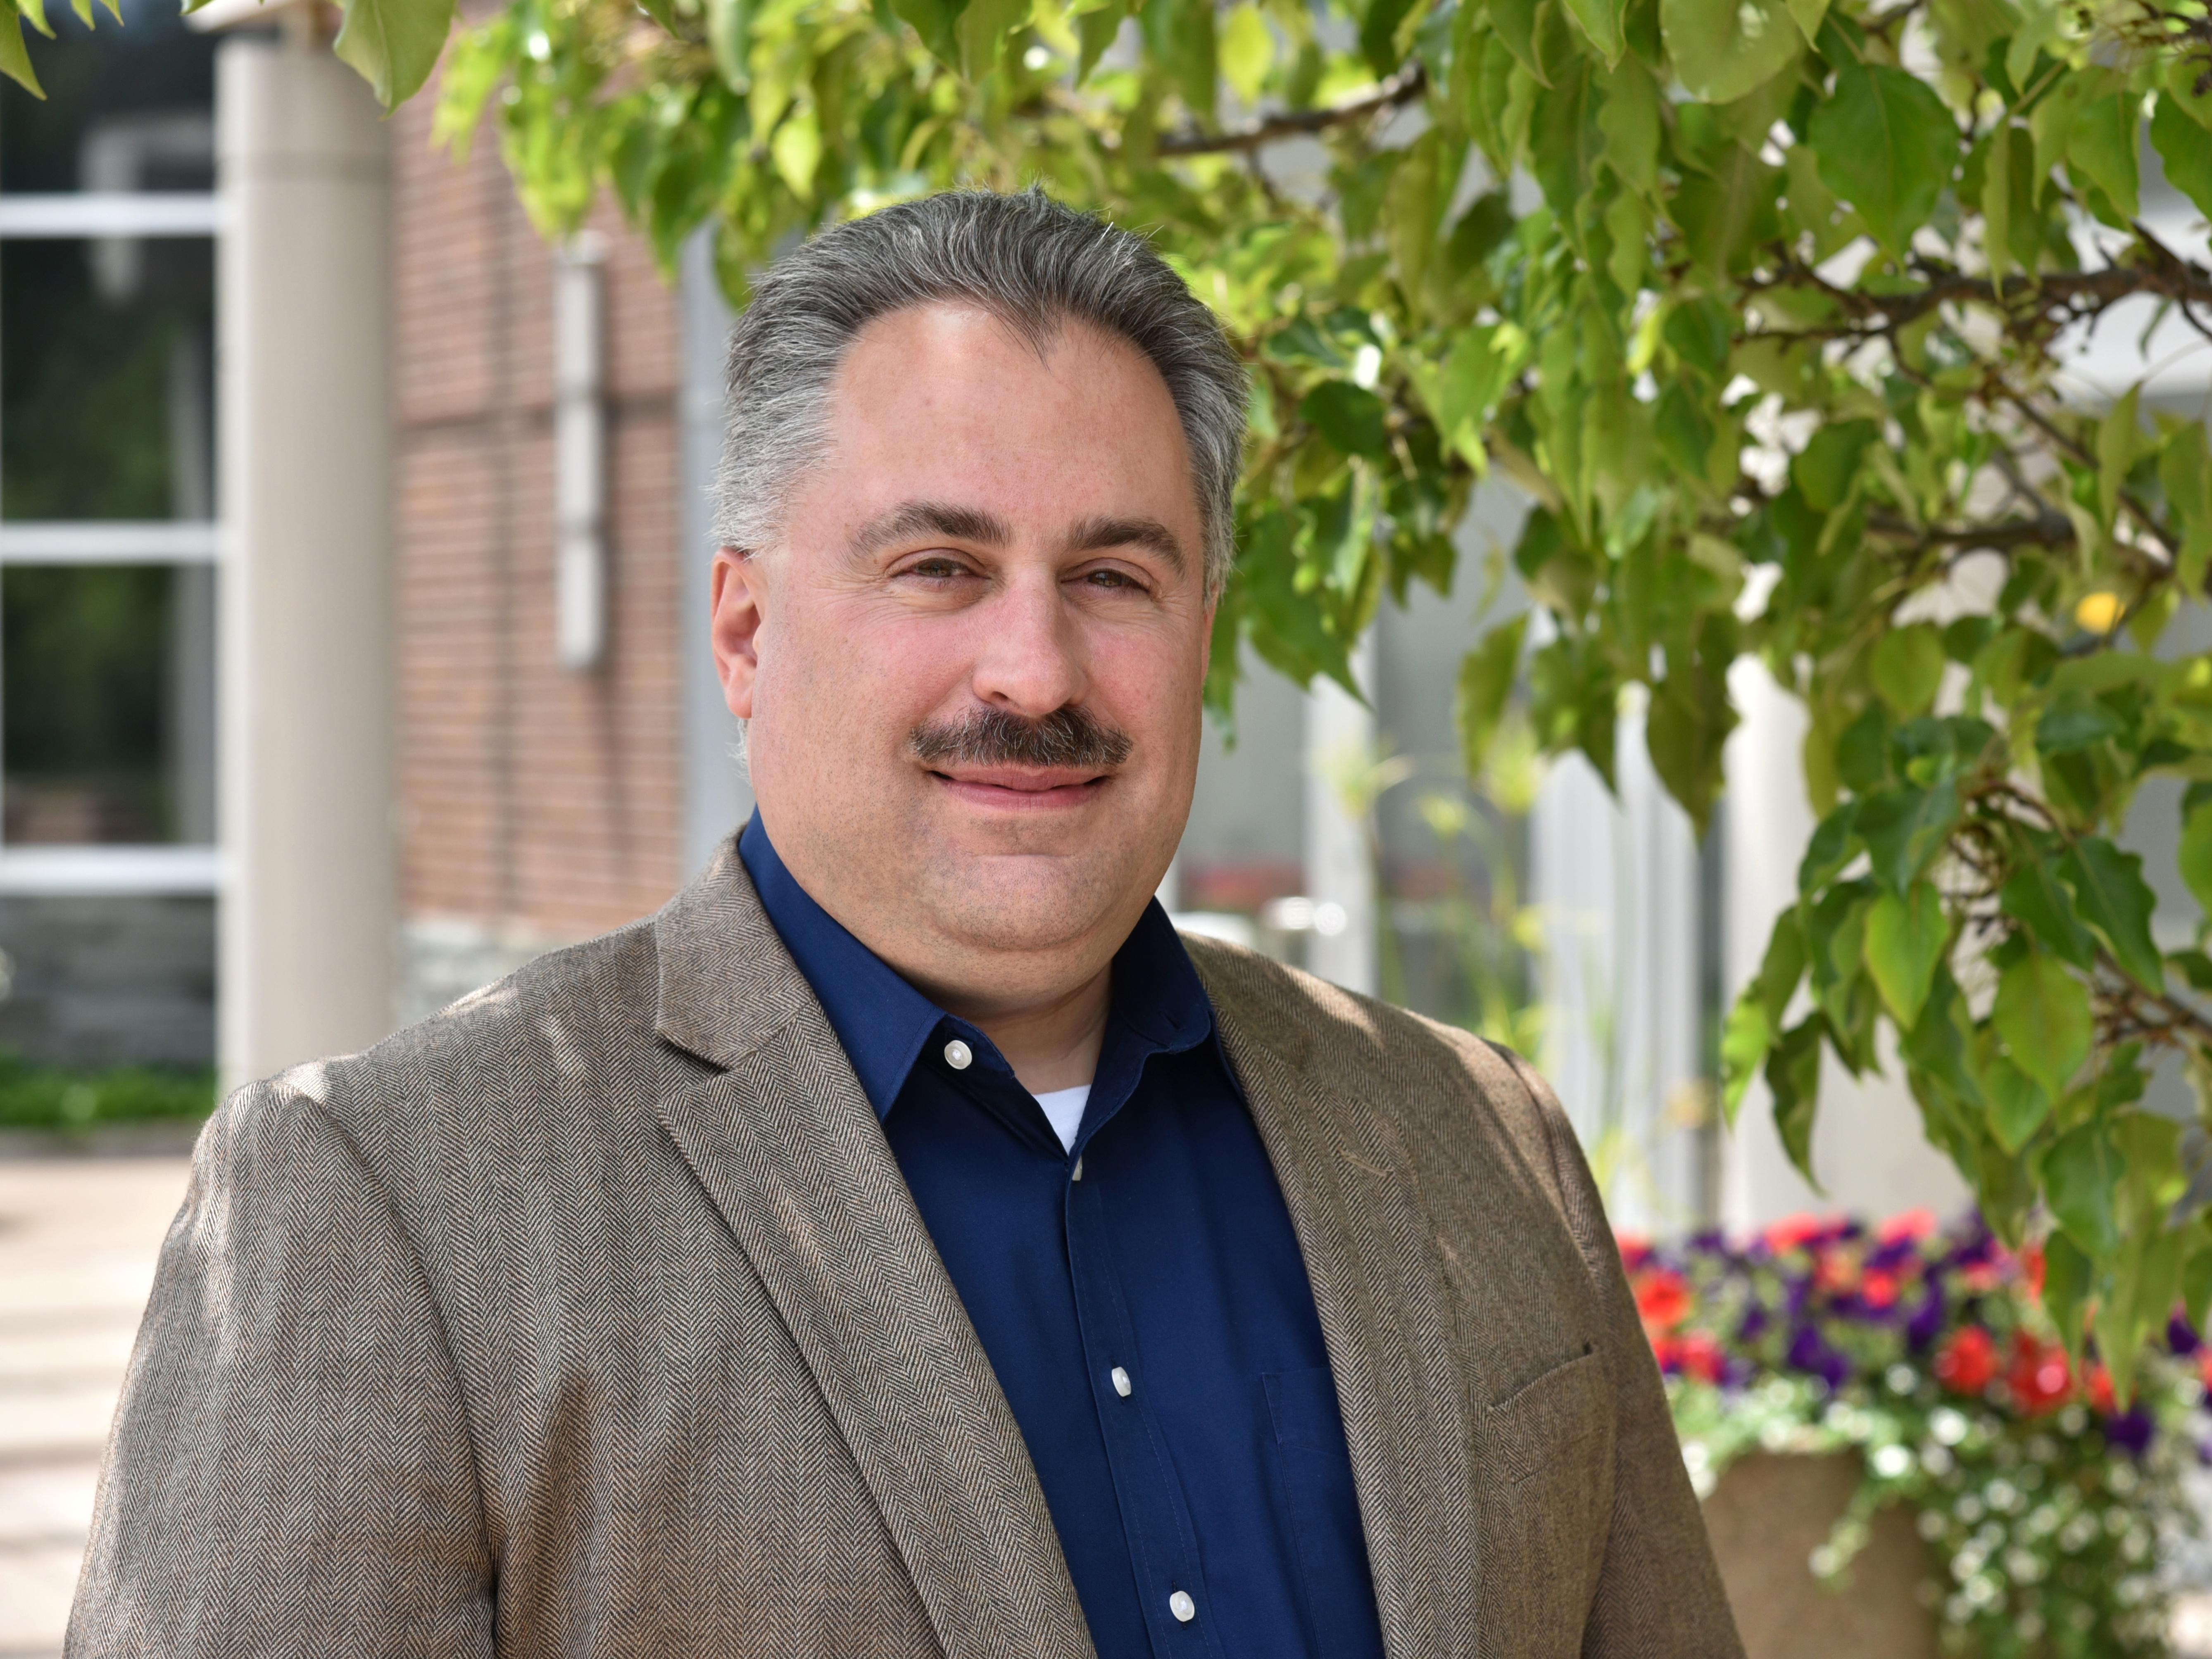 Mike Paestella recently earned the Chancellor's Award for Excellence in Professional Service